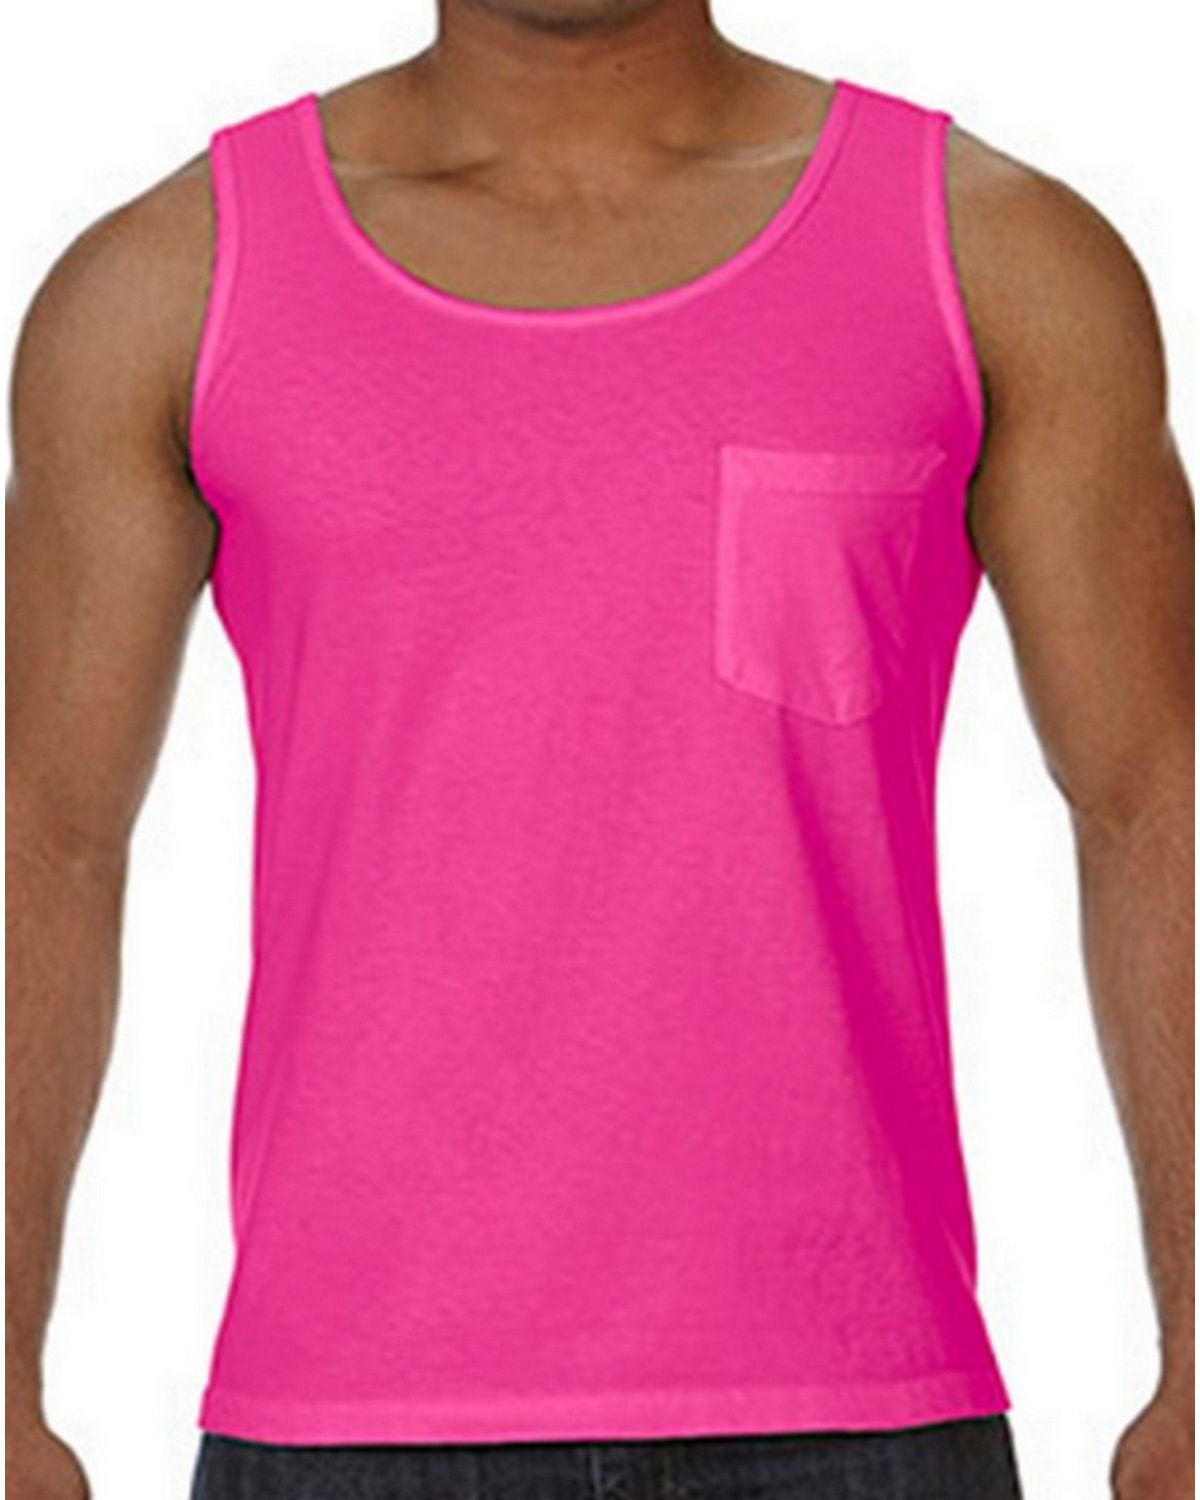 Size Chart for Comfort Colors 9330 Adult Pocket Tank Top